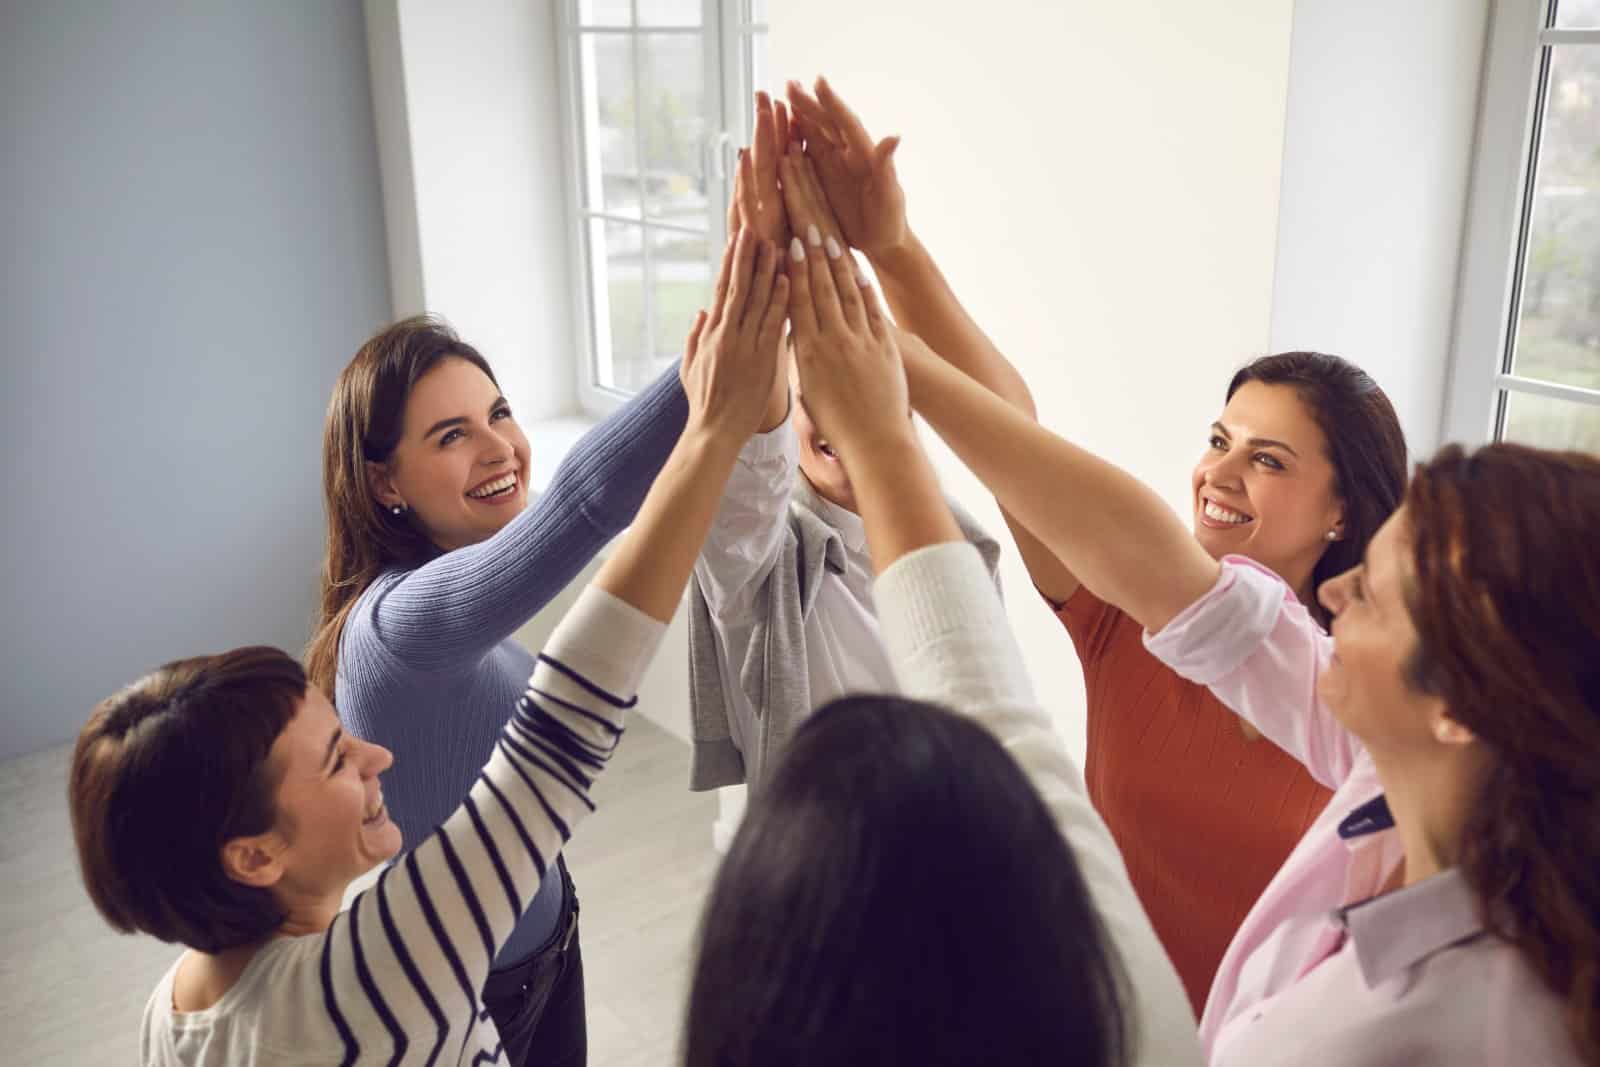 Image Credit: Shutterstock / Studio Romantic <p><span>Surround yourself with individuals who uplift and inspire you. </span></p> <p><span>Cultivate relationships with mentors, peers, and like-minded professionals who provide guidance, encouragement, and constructive feedback. </span></p> <p><span>Join professional networking groups or attend industry events to expand your circle of support.</span></p>